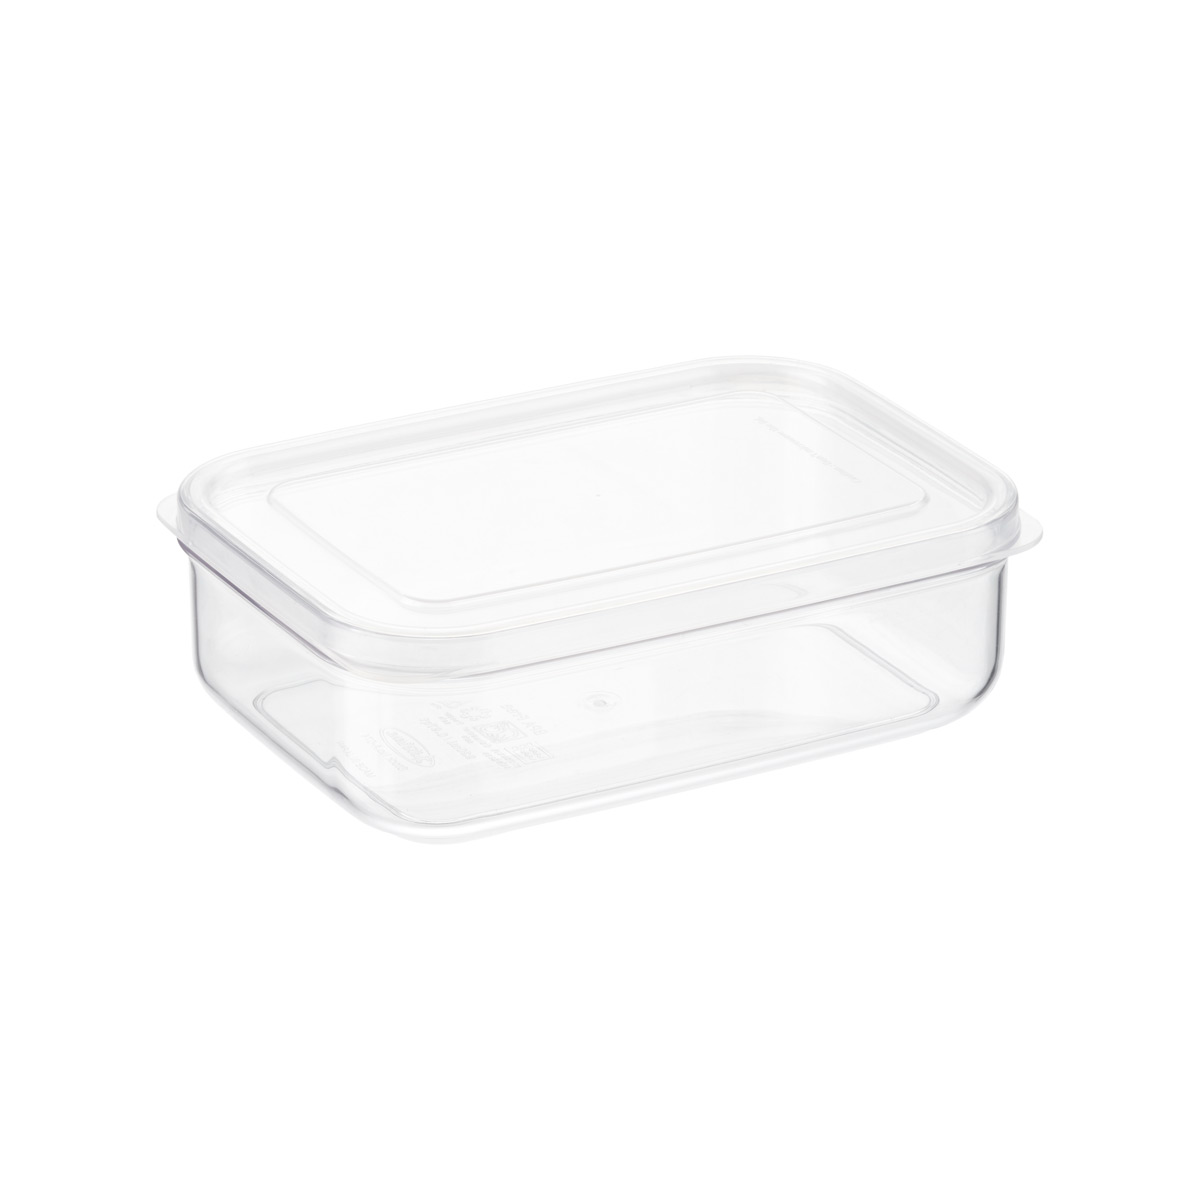 https://www.containerstore.com/catalogimages/308250/10053306-lustroware-clear-food-conta.jpg